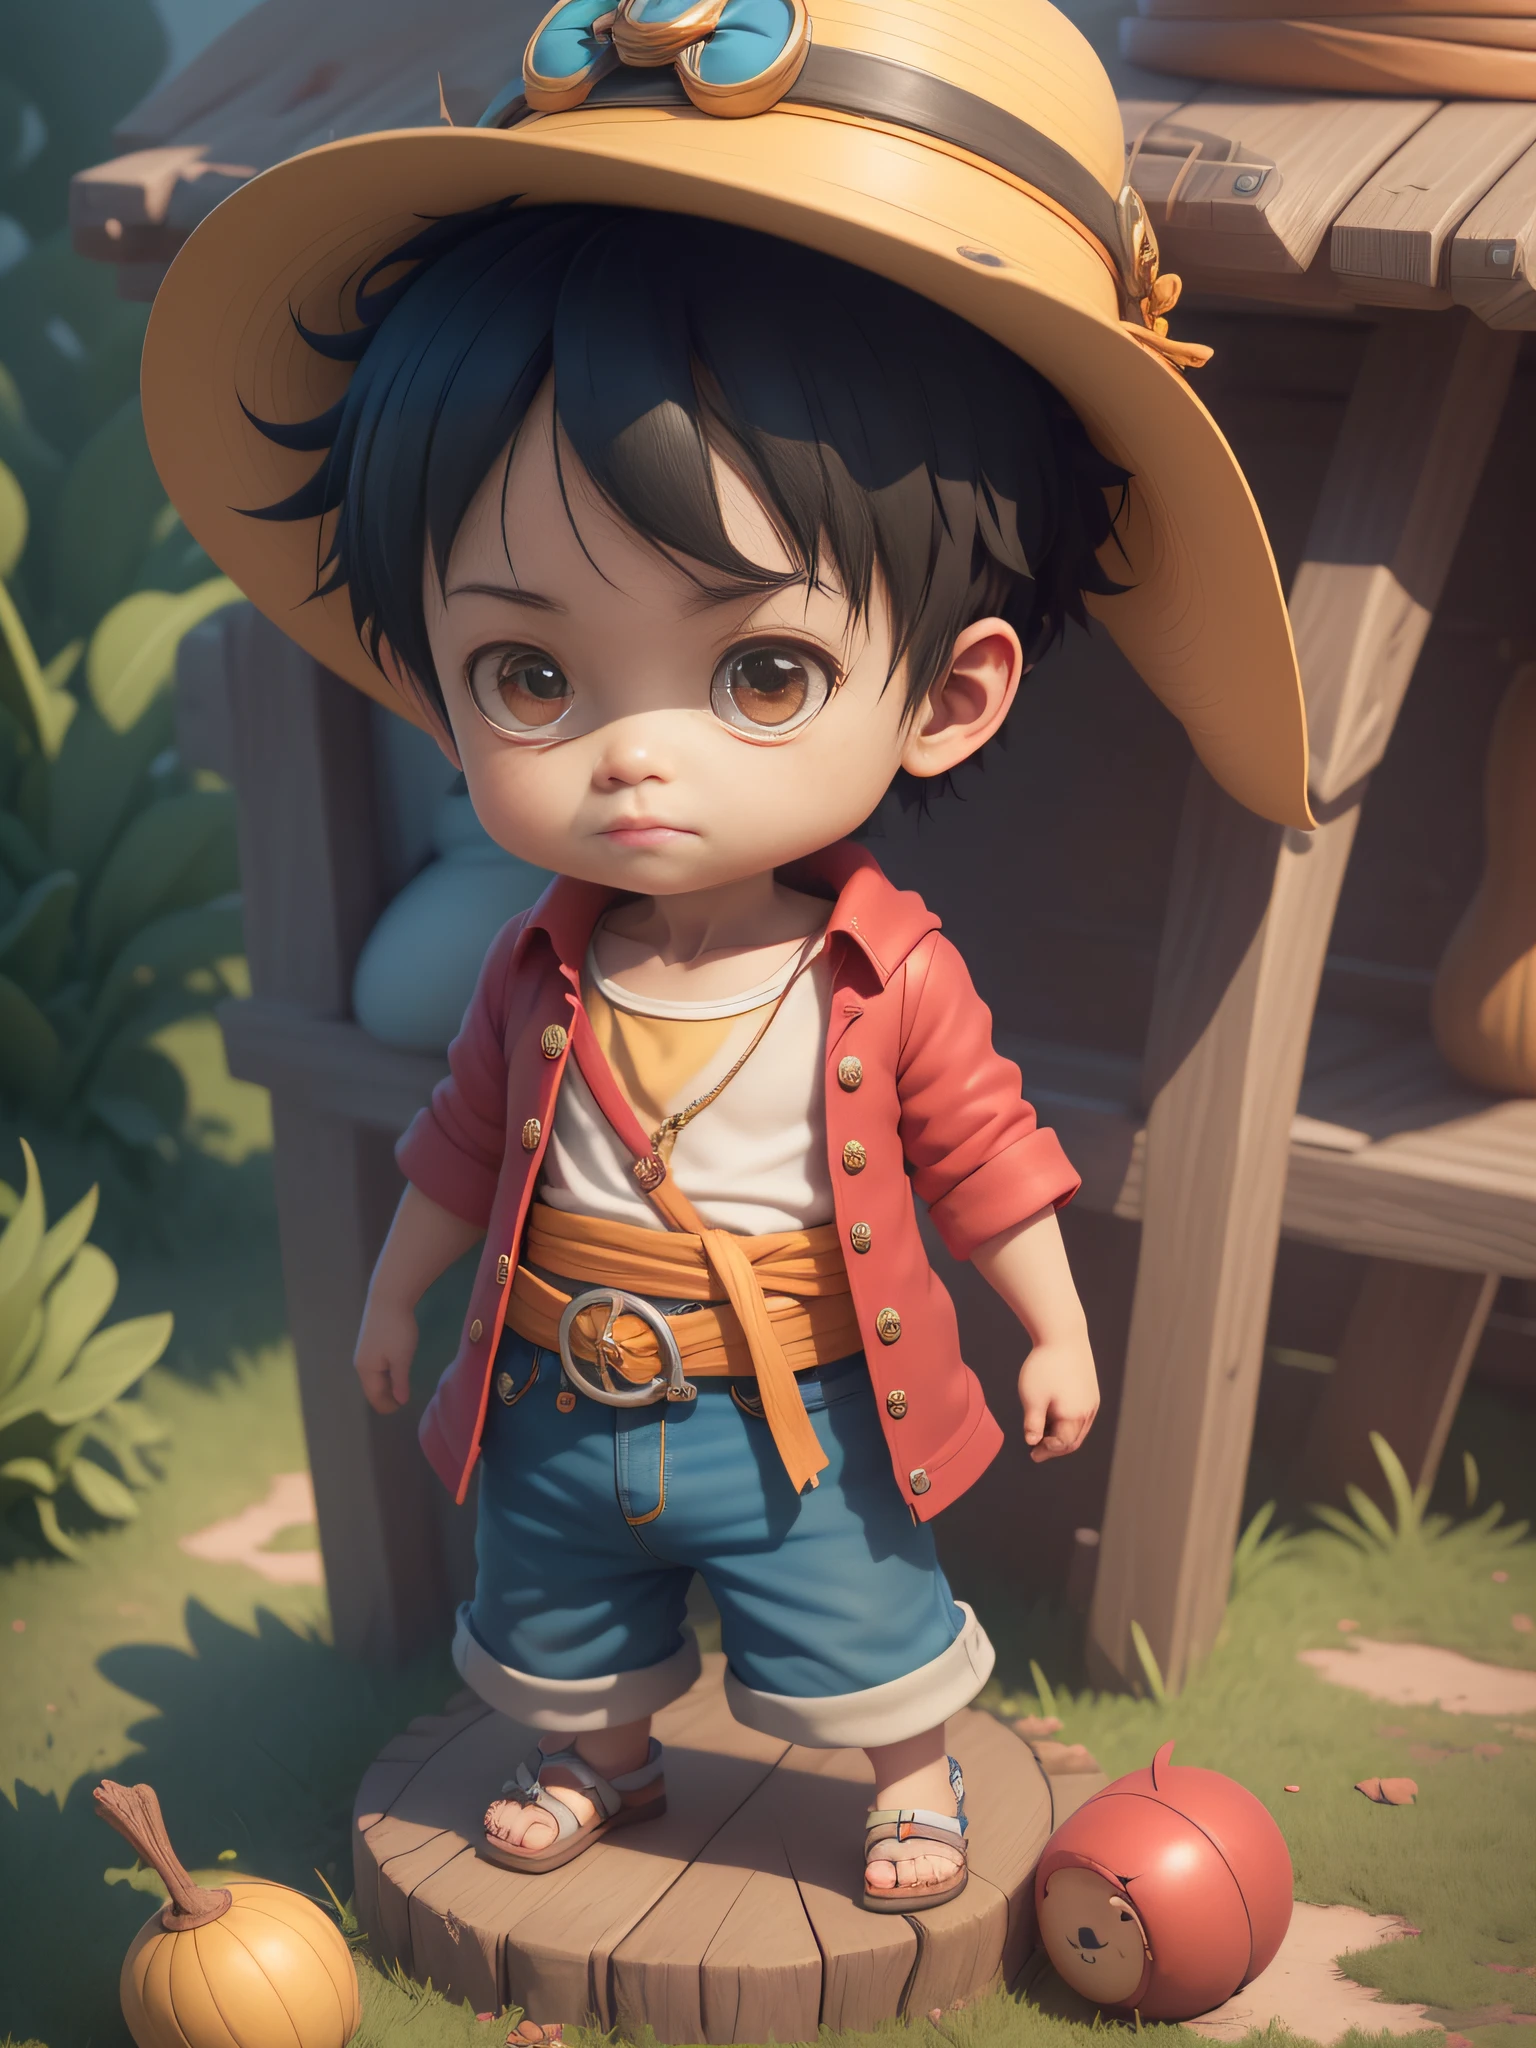 cute 3d render, cute detailed digital art, male explorer mini cute boy, cute digital painting, stylized 3d render, cute digital art, cute render 3d anime boy, luffy the little pirate looks up, cute! c4d, portrait anime sea pirate boy, ((he is wearing an open long-sleeved red cardigan with four buttons, with a yellow sash tied around his waist, blue shorts with cuffs, sandals)), ((standing in a pirate ship)).